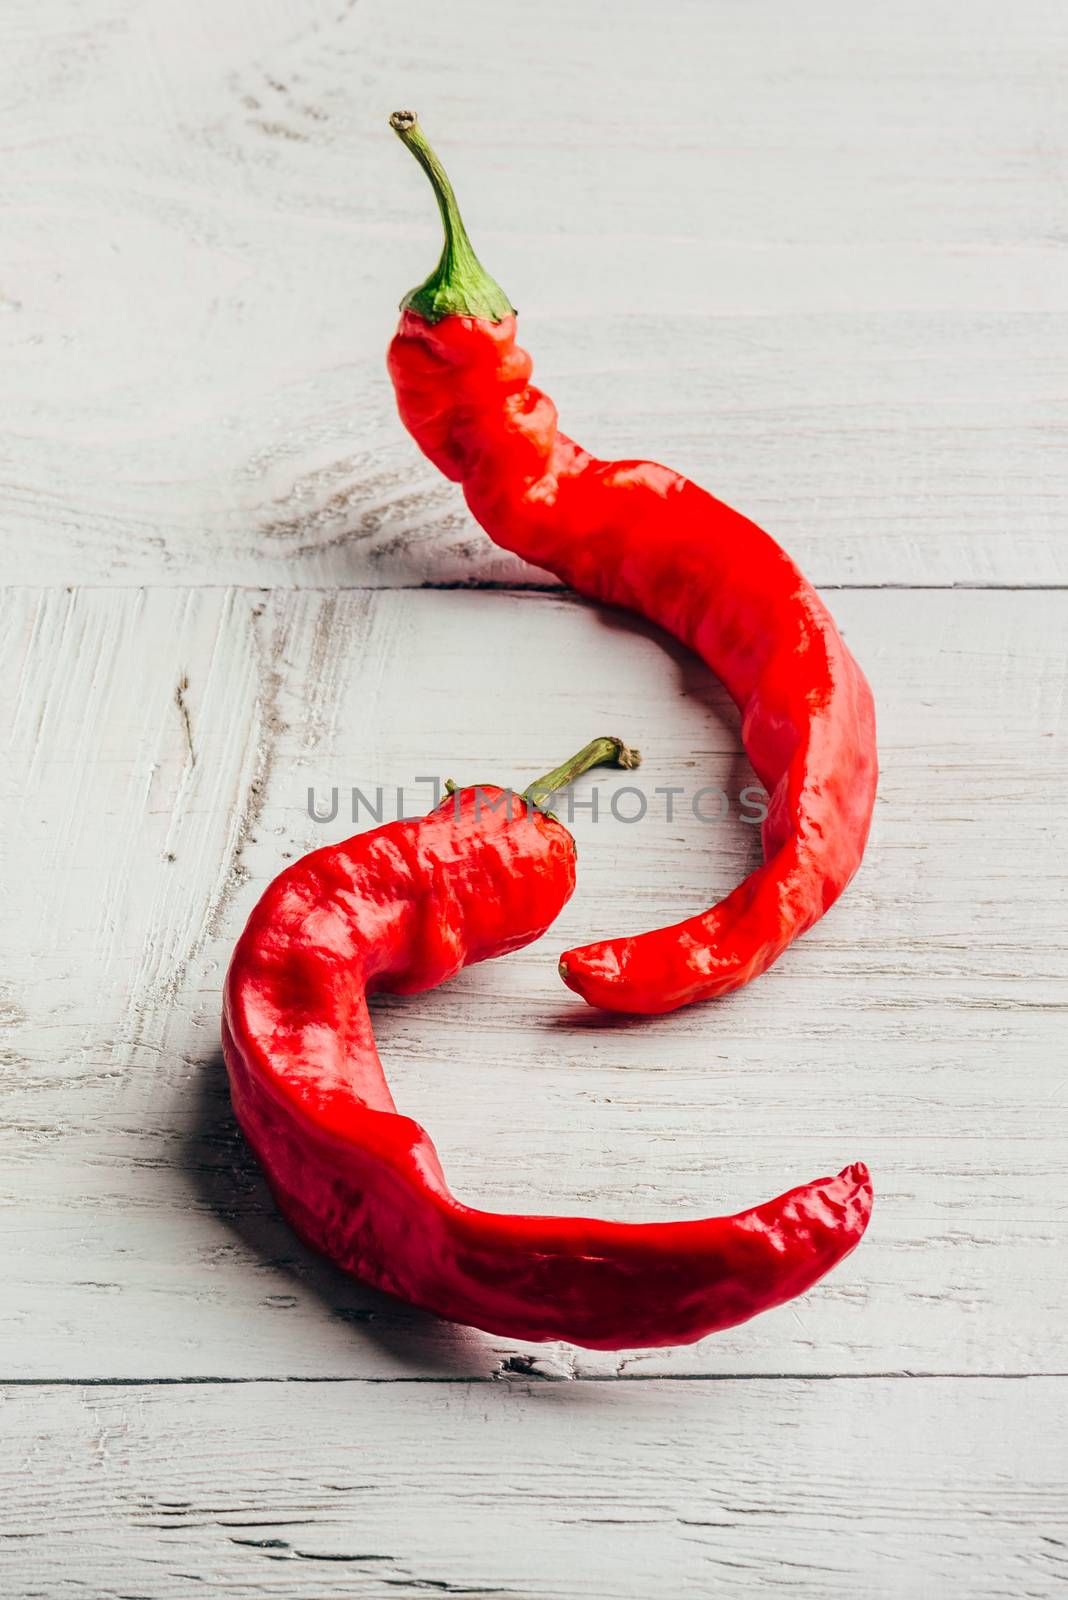 Two ripe chili peppers over white wooden background.